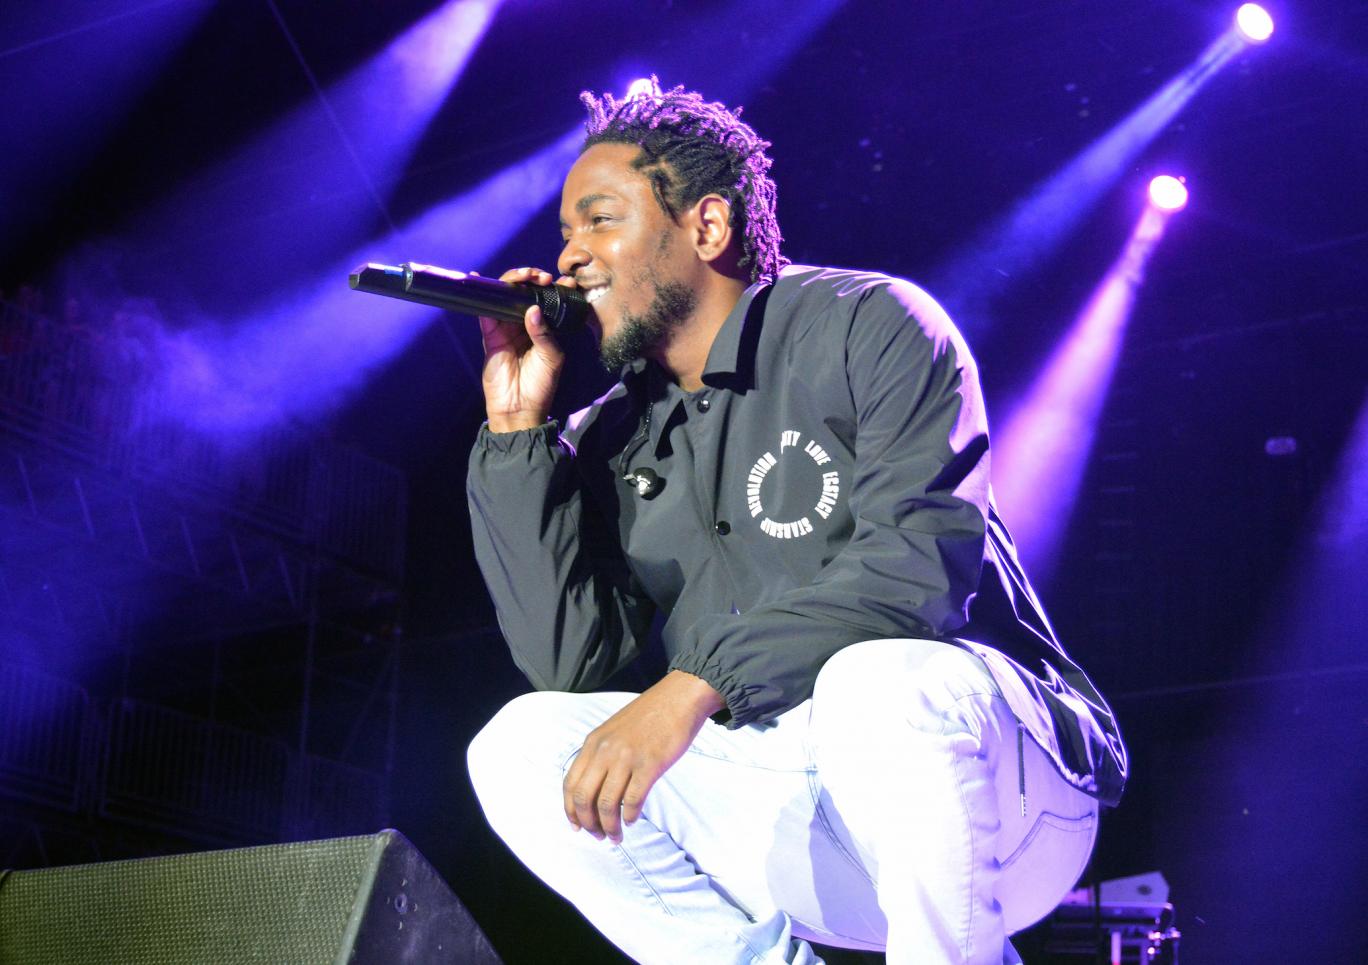 Kendrick performs at Bonnaroo Music and Arts Festival in 2015.